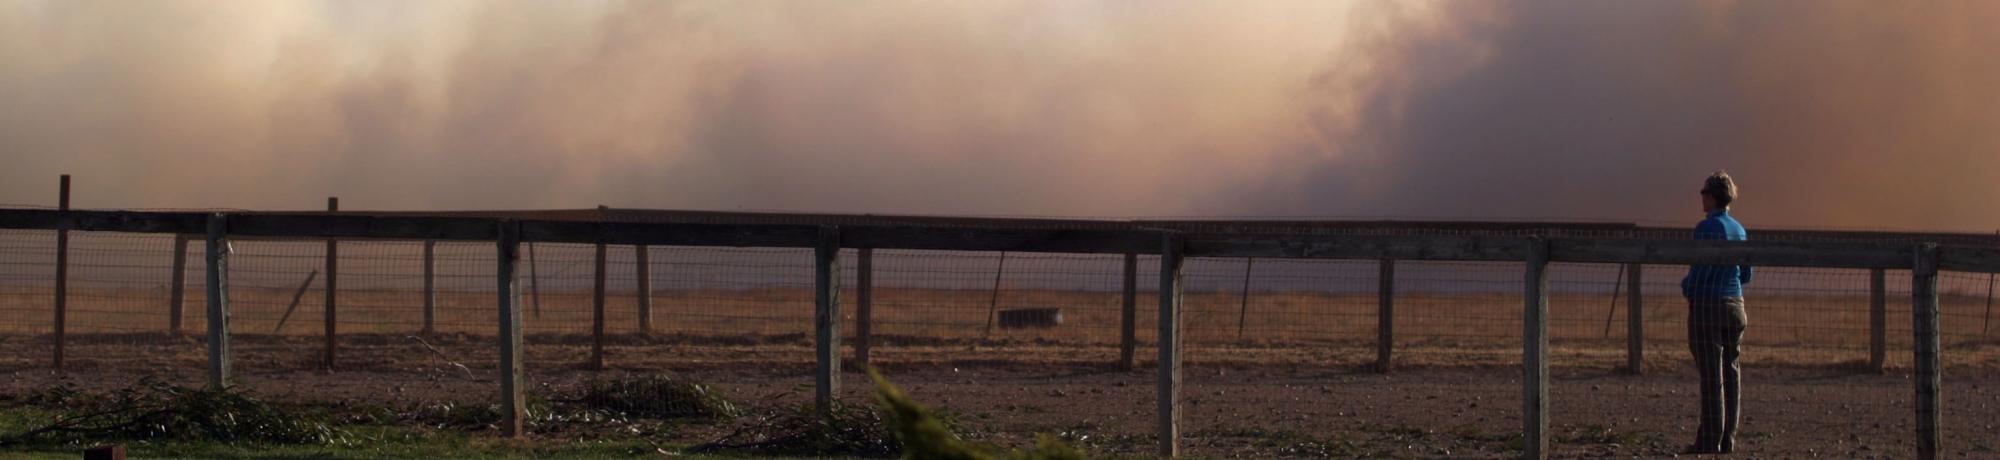 fence line with smoke in background